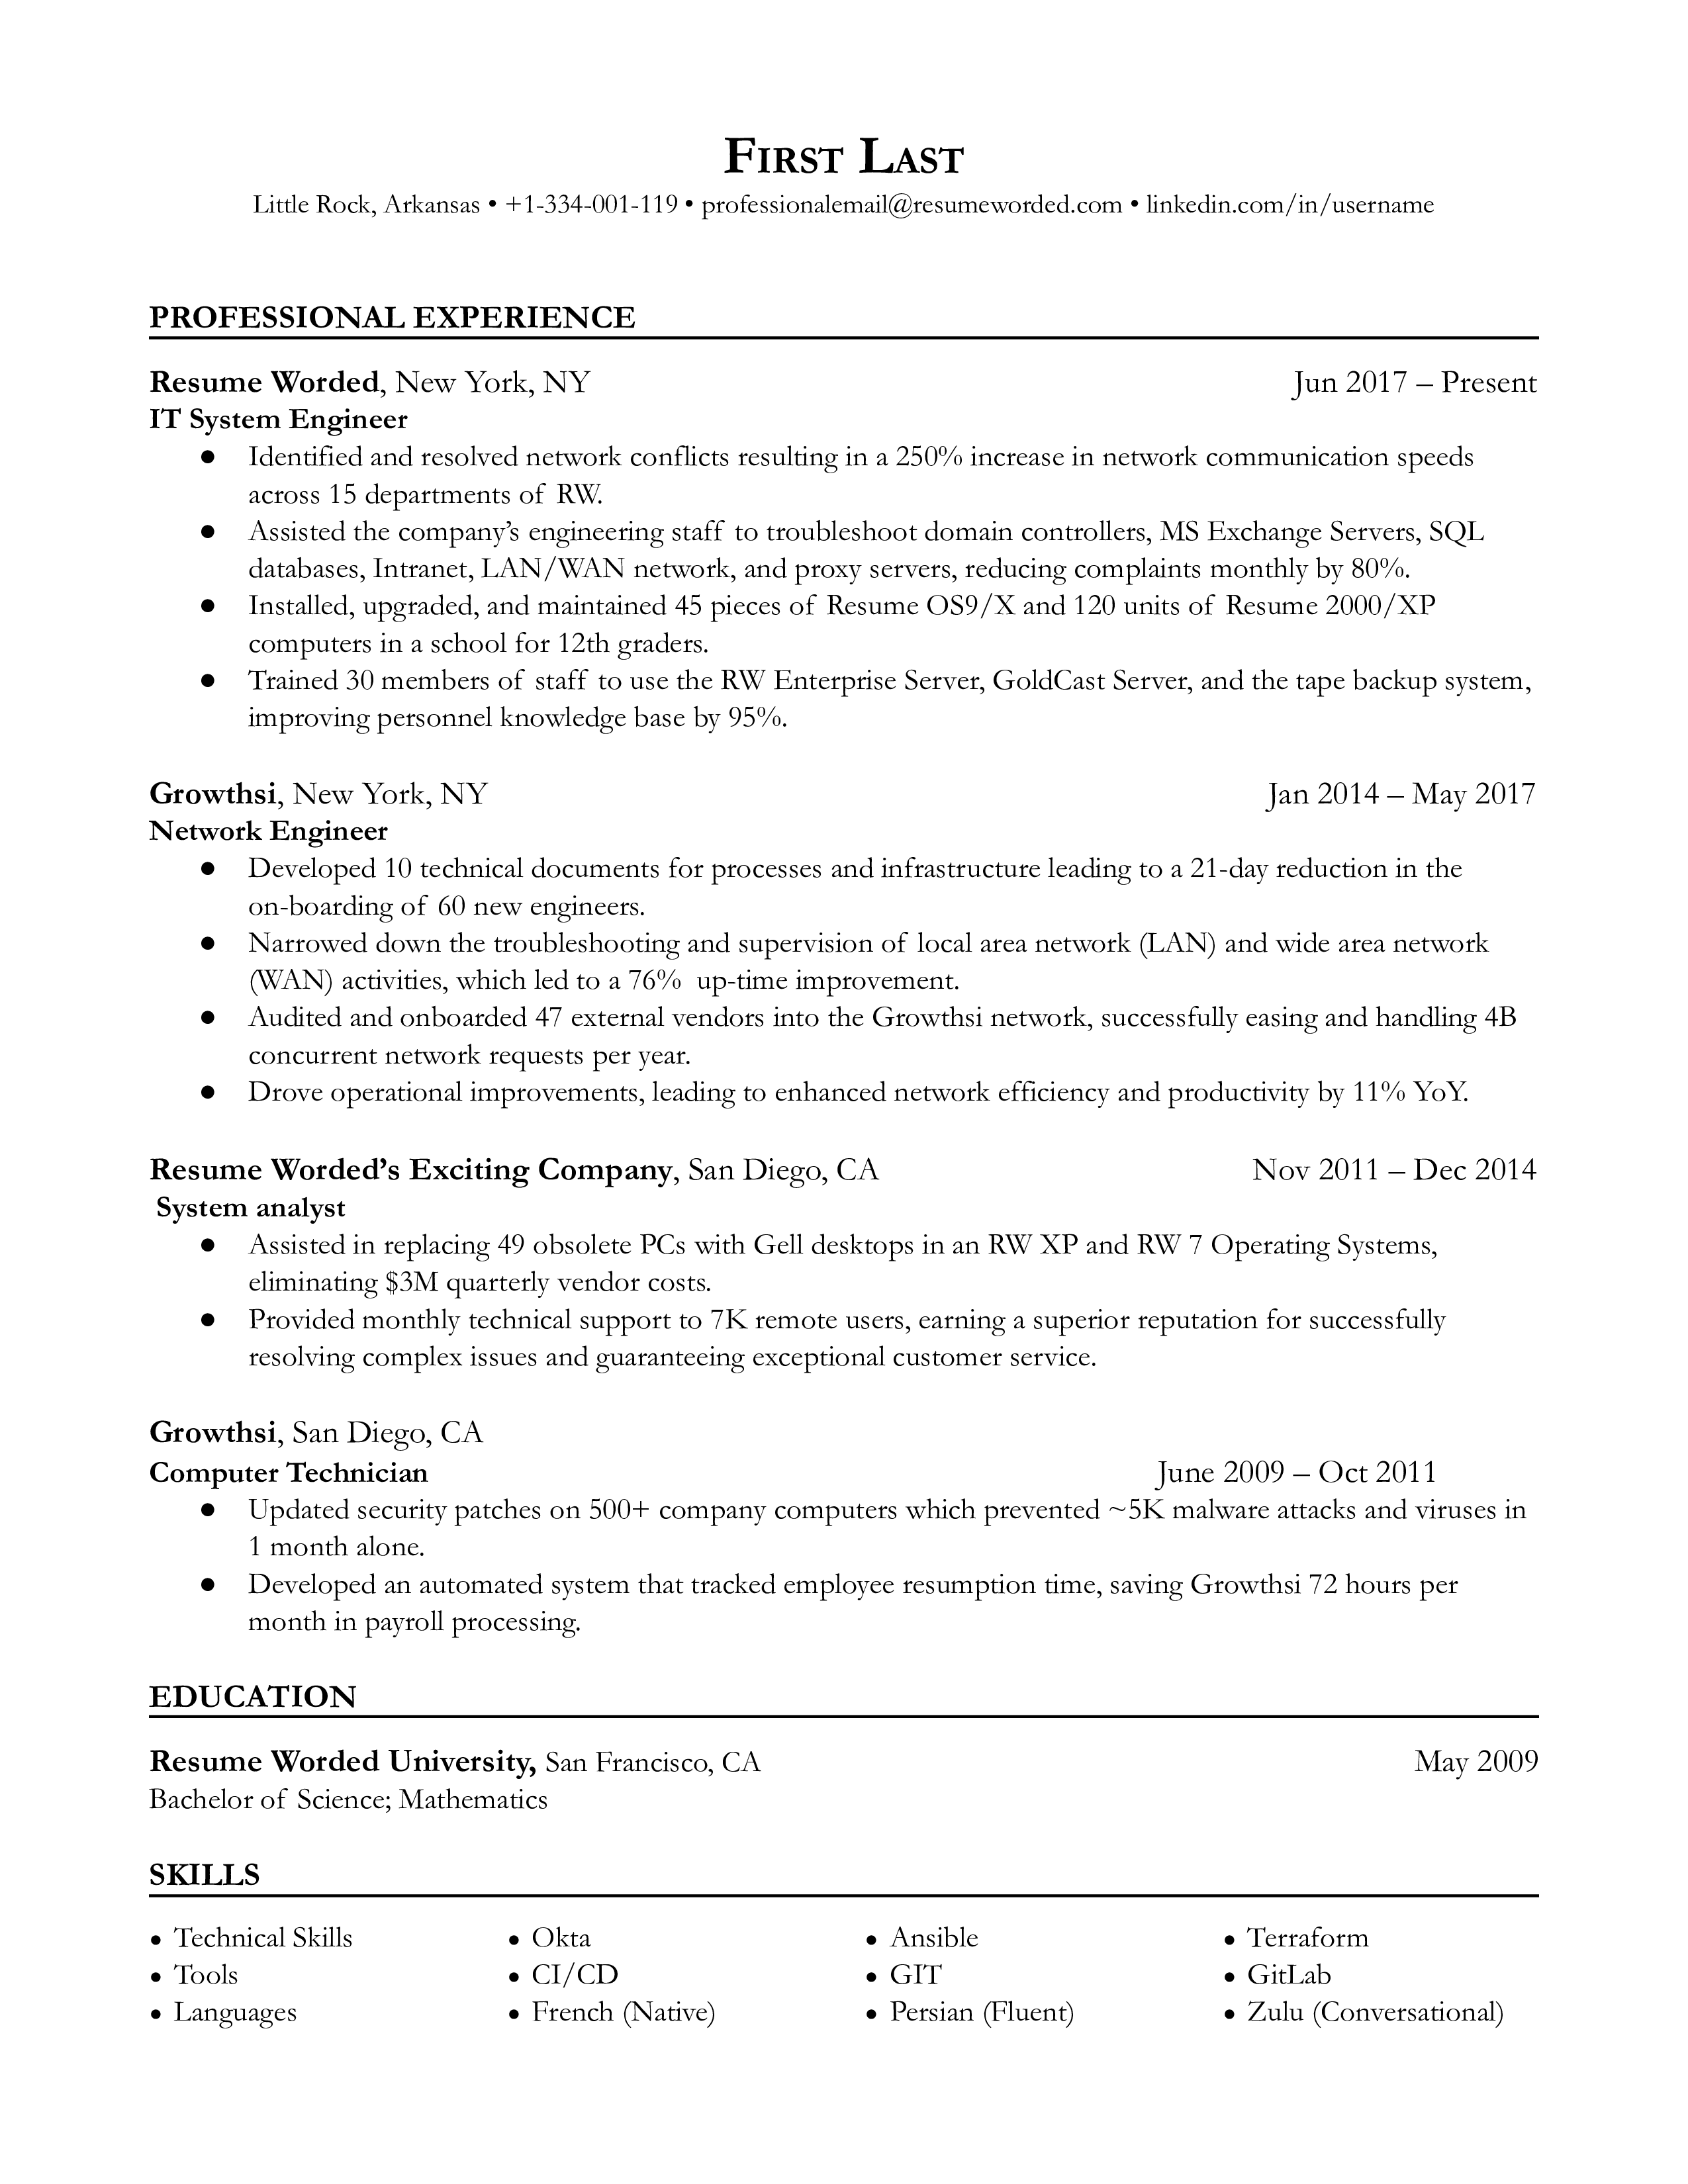 A CV for an IT System Engineer showcasing cloud platform skills and soft skills.